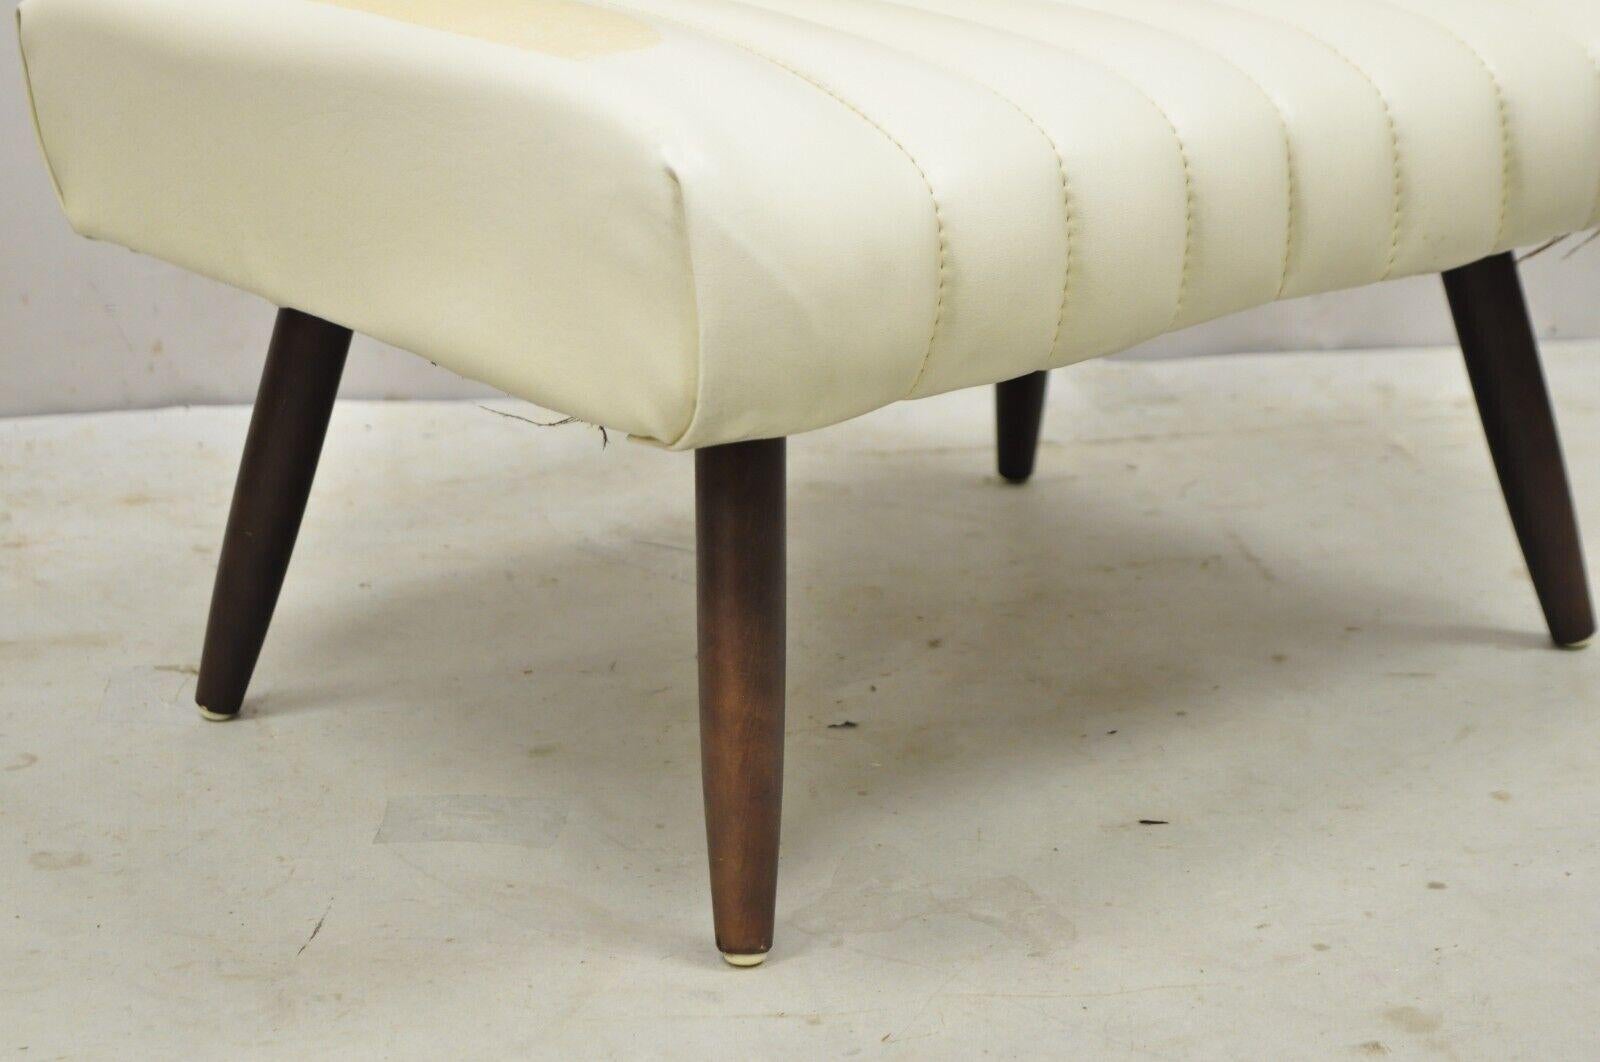 Vintage Mid-Century Modern Adjustable Angle Ottoman Footstool with Wooden Legs In Good Condition For Sale In Philadelphia, PA